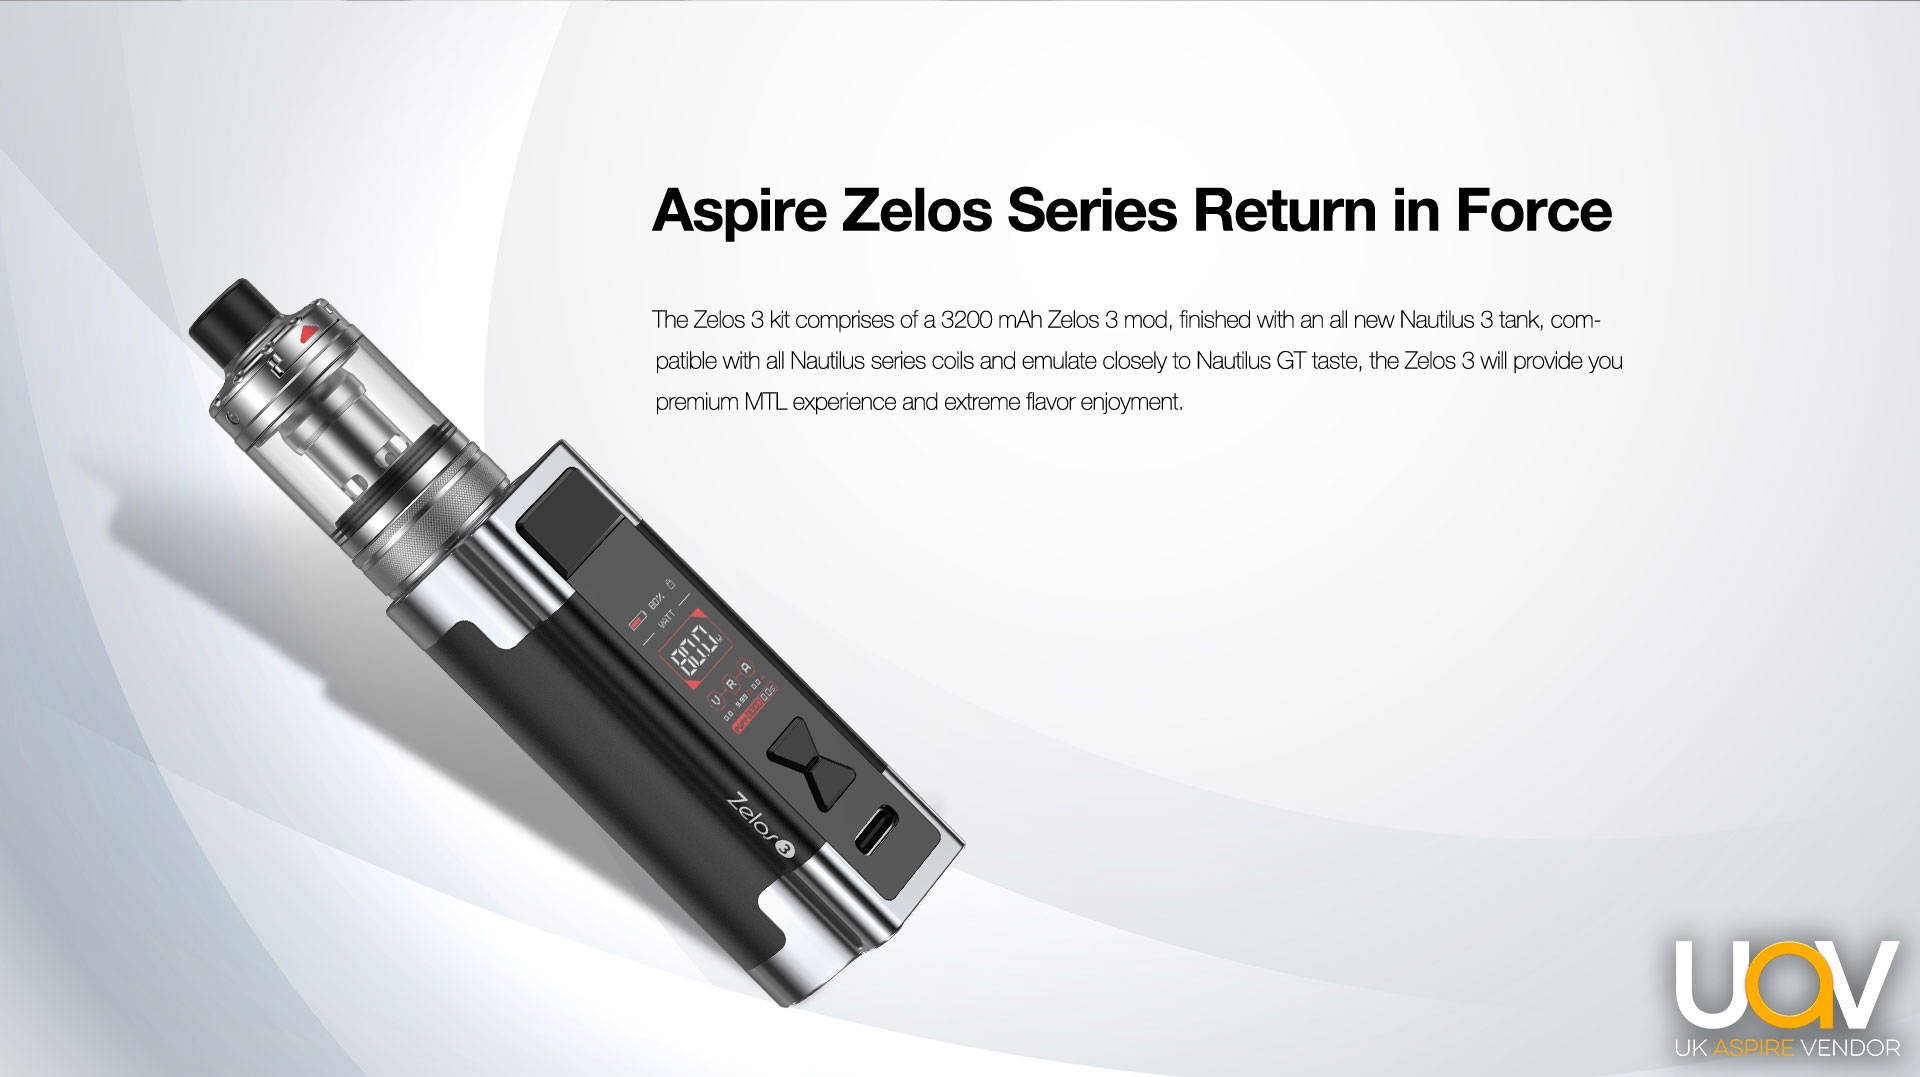 Aspire Zelos Series Return in Force  The Zelos 3 kit comprises of a 3200 mAh Zelos 3 mod, finished with an all new Nautilus 3 tank, compatible with all Nautilus series coils and emulate closely to Nautilus GT taste, the Zelos 3 will provide you premium MTL experience and extreme flavor enjoyment.